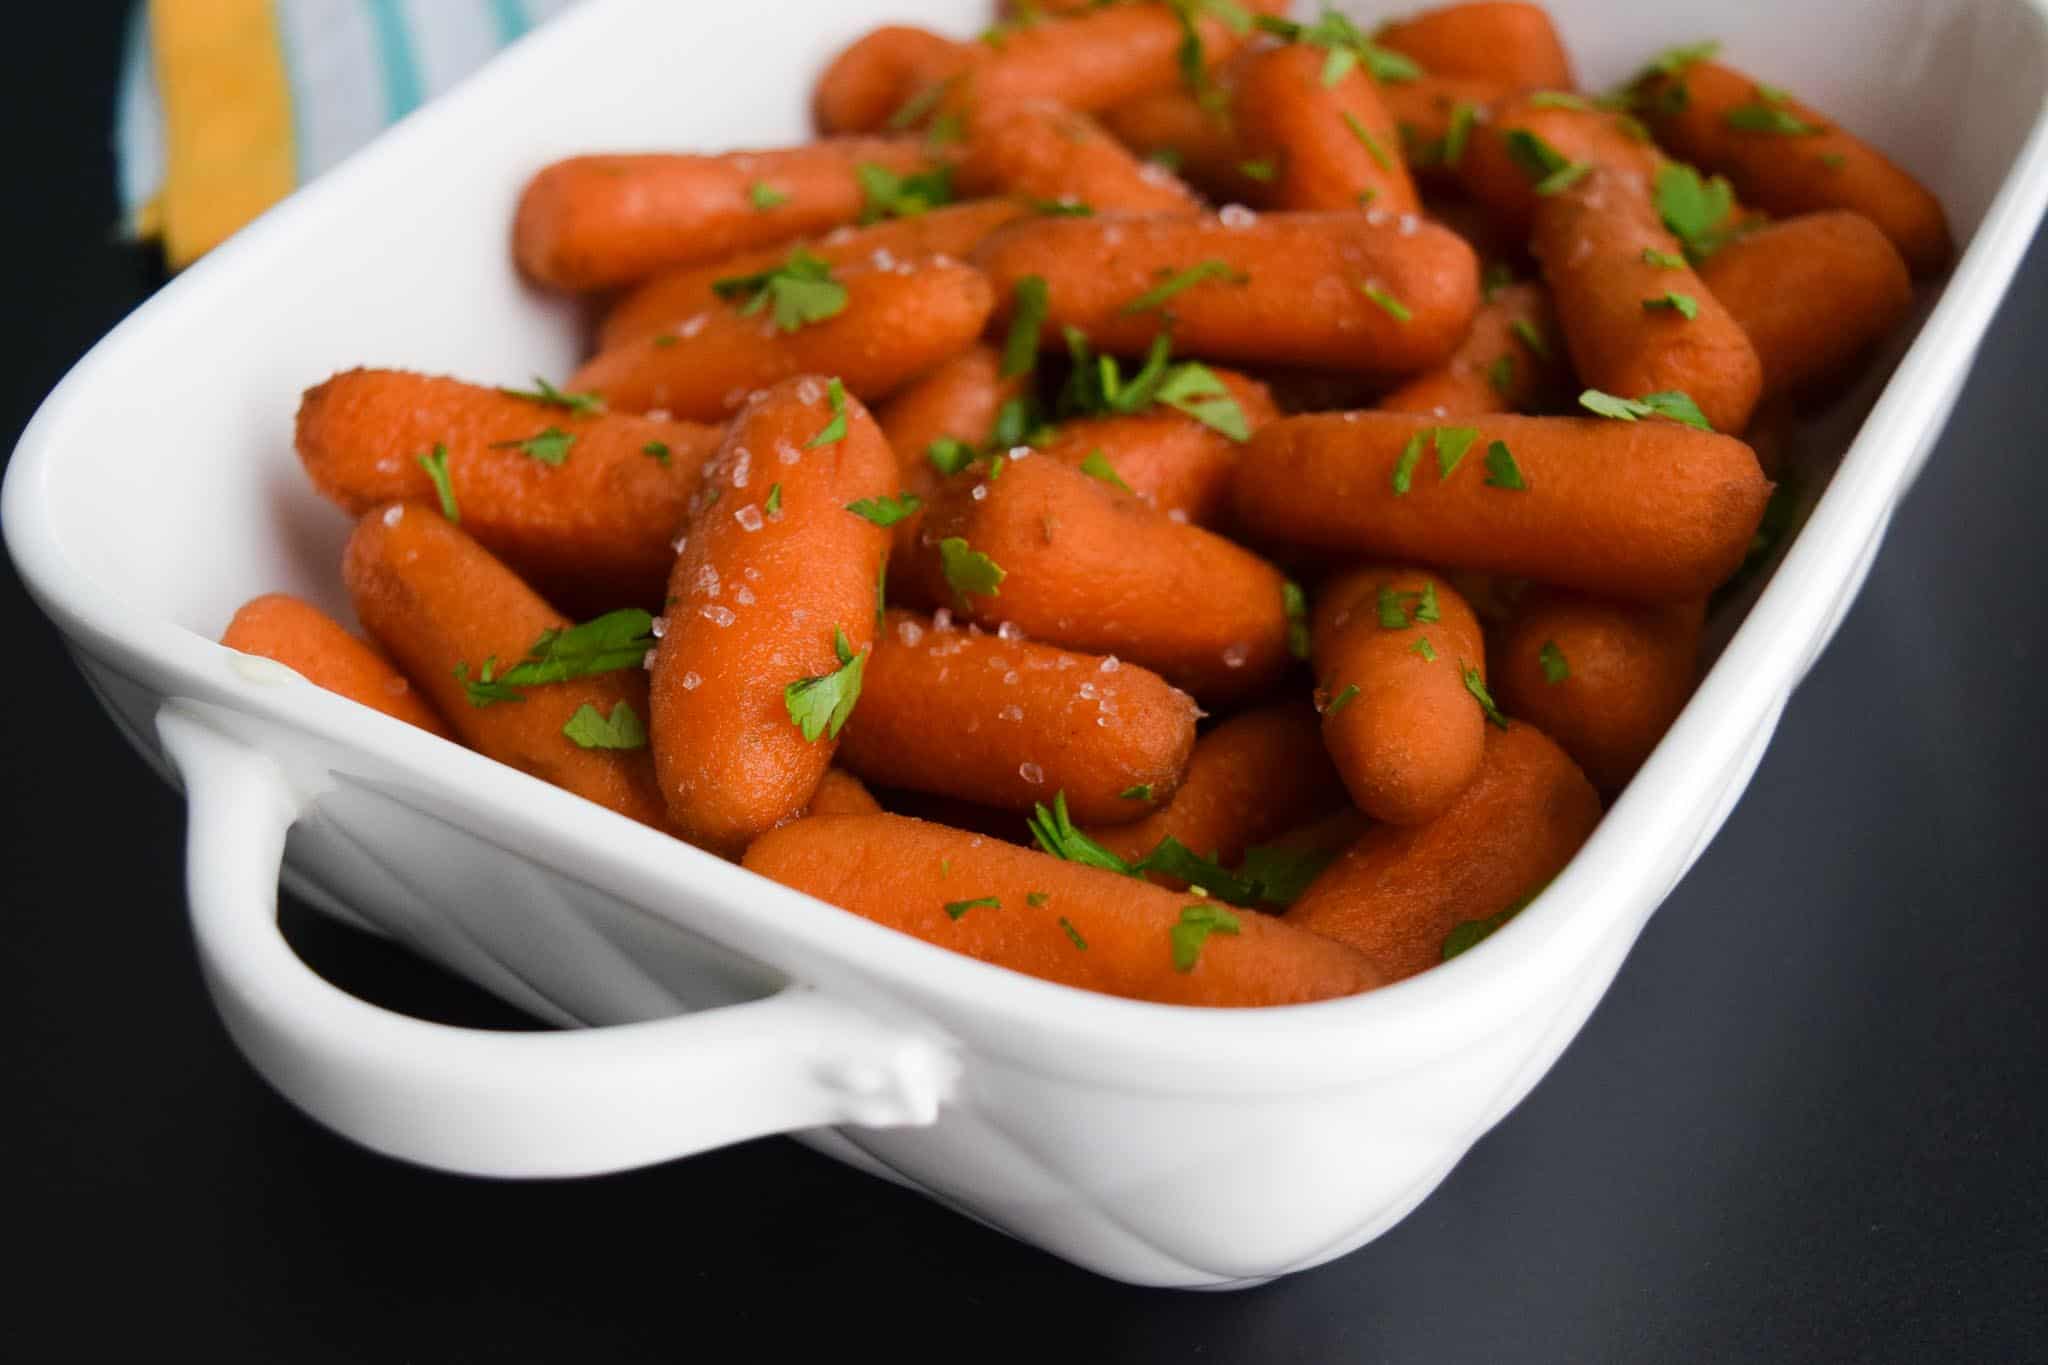 Honey Balsamic Roasted Carrots topped with parsley and salt in white serving dish close up